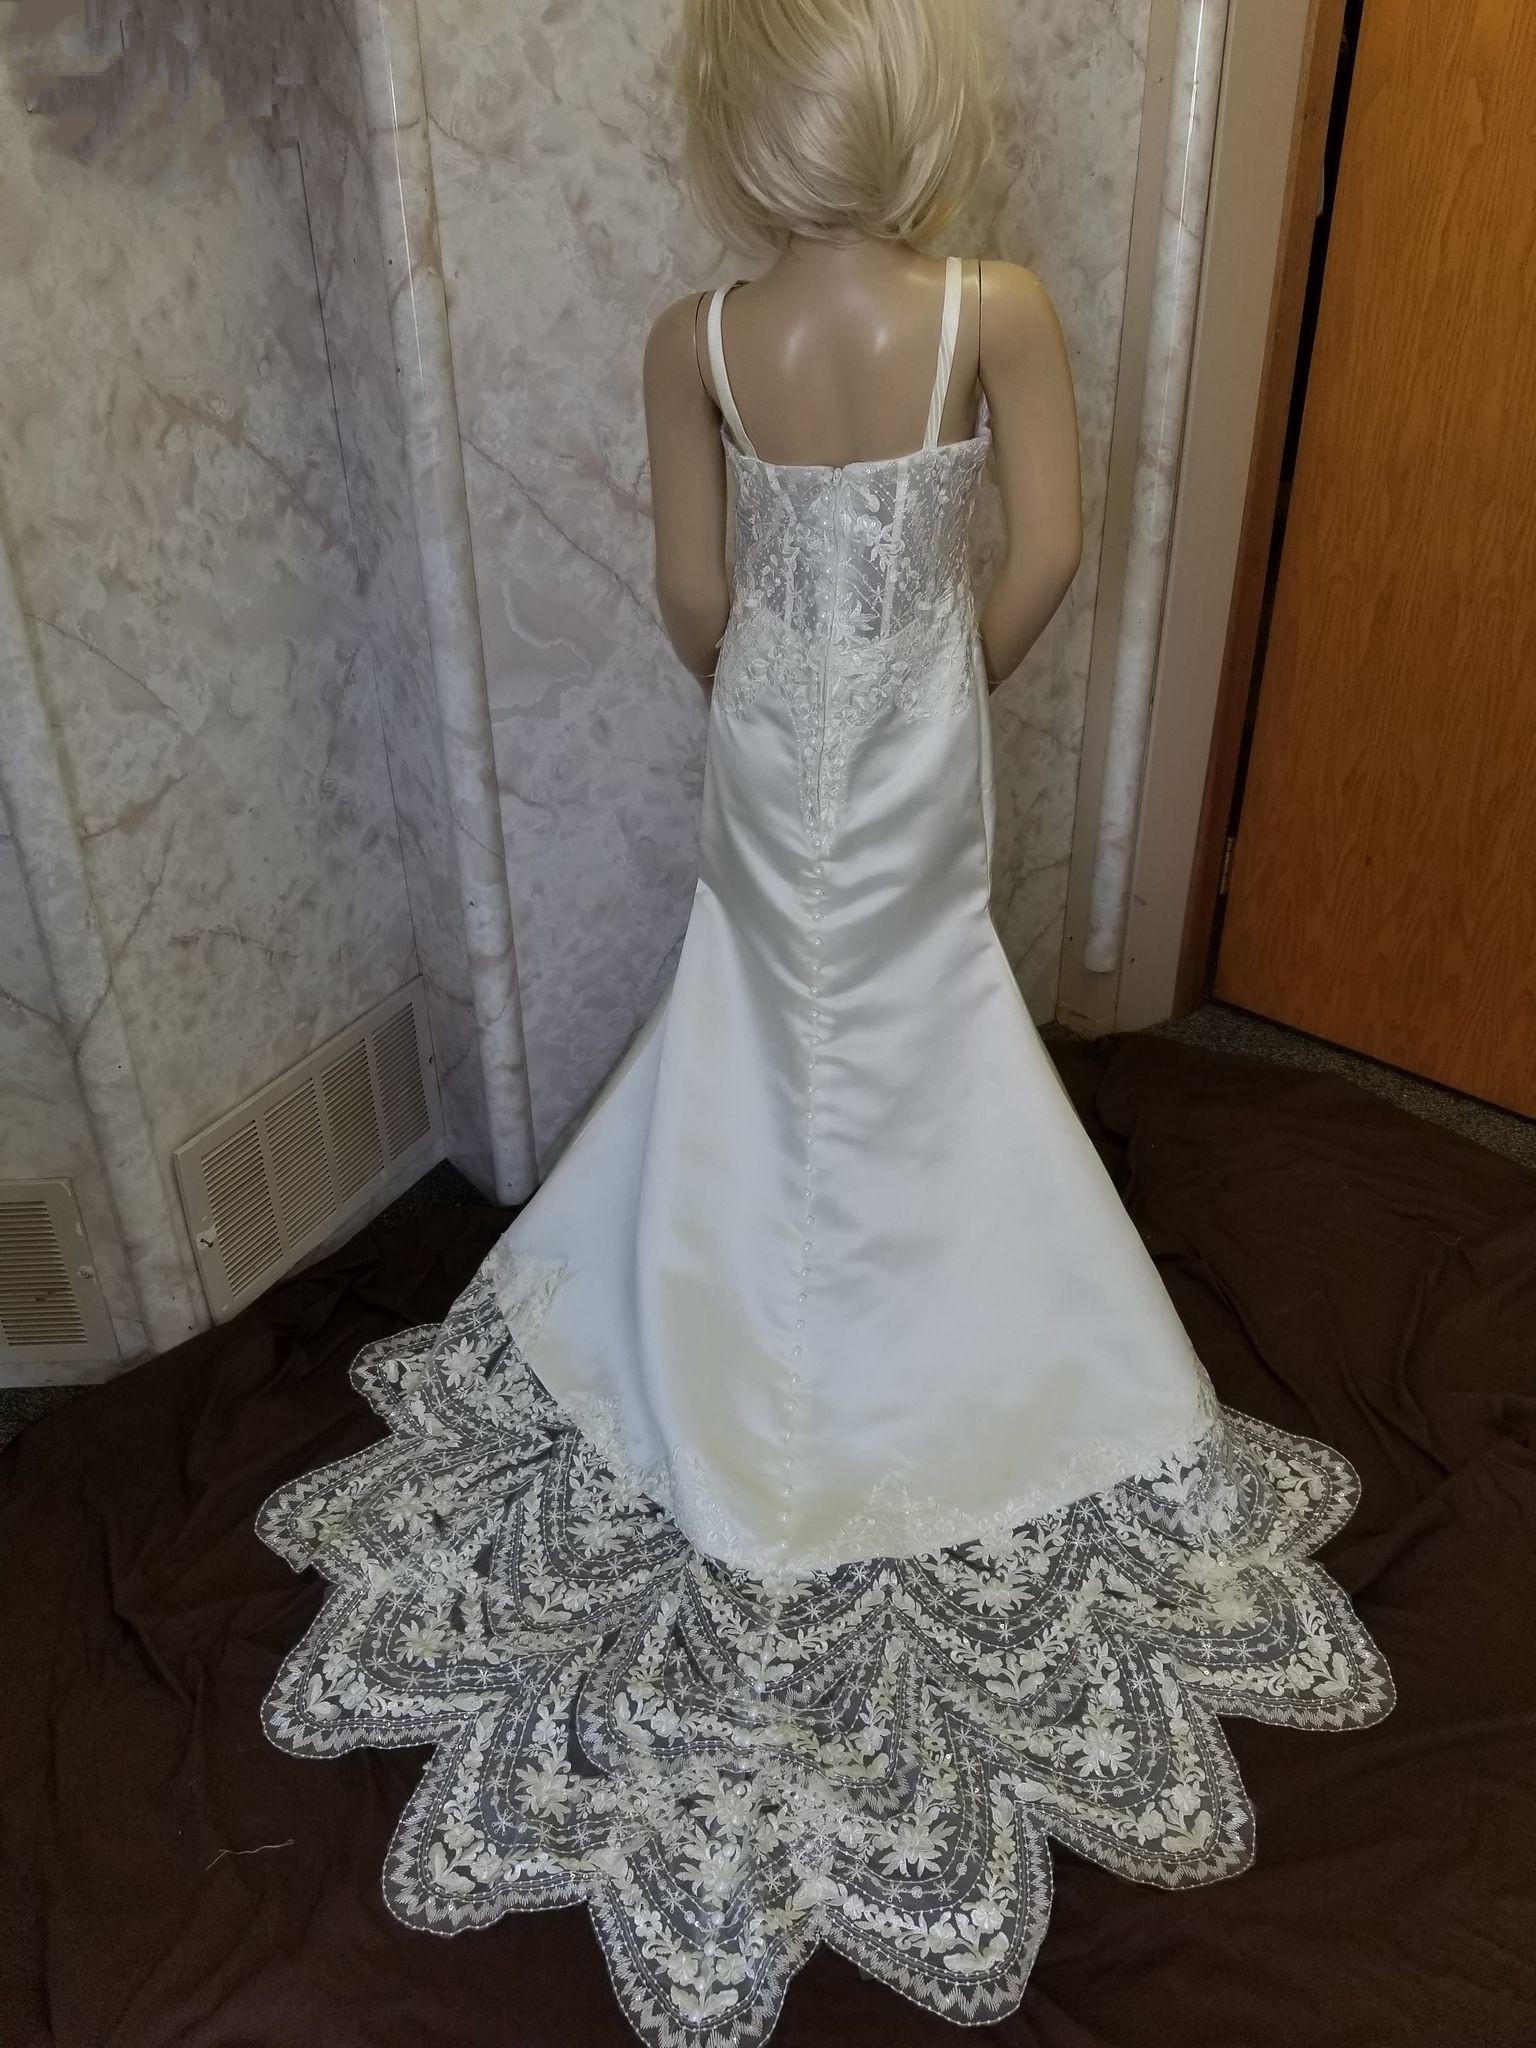 matched my wedding dress for my flower girl